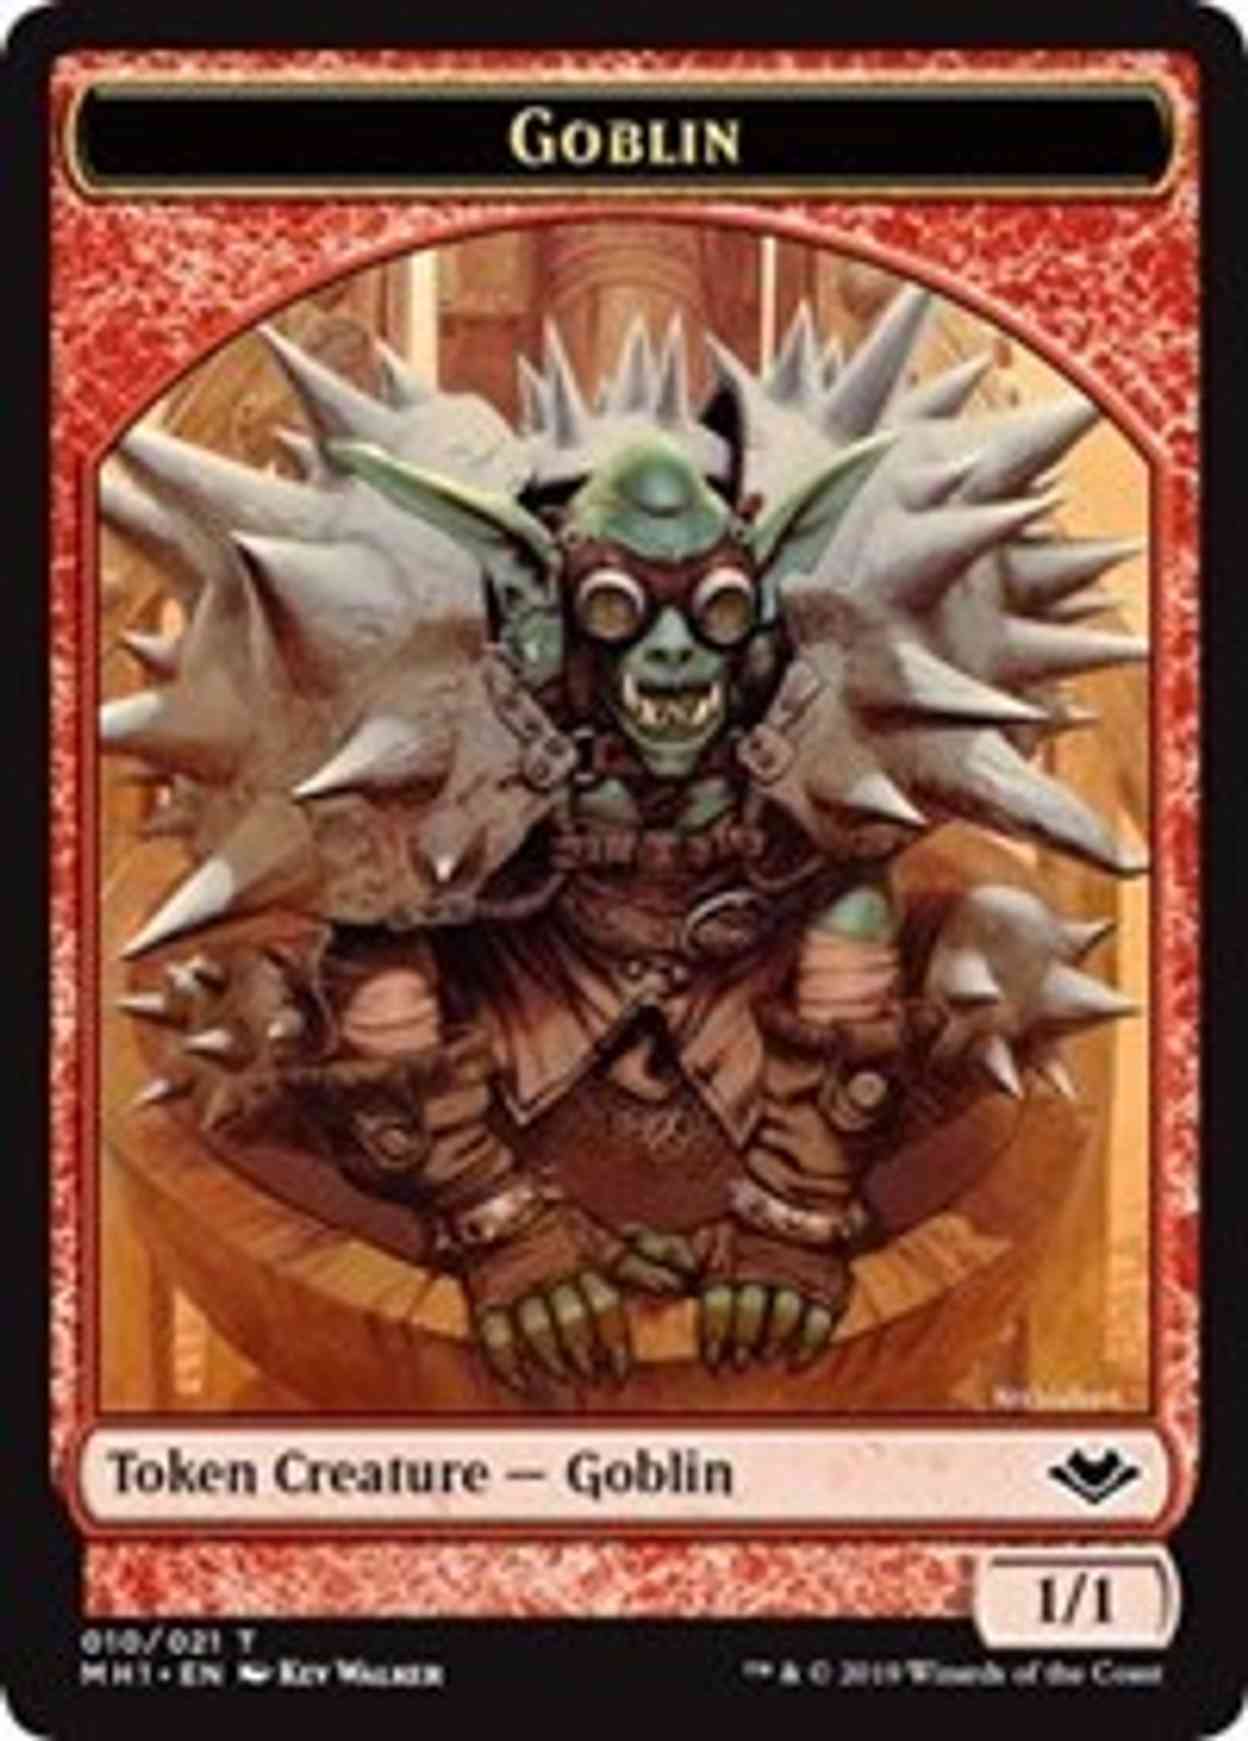 Goblin (010) // Emblem - Wrenn and Six (021) Double-sided Token magic card front